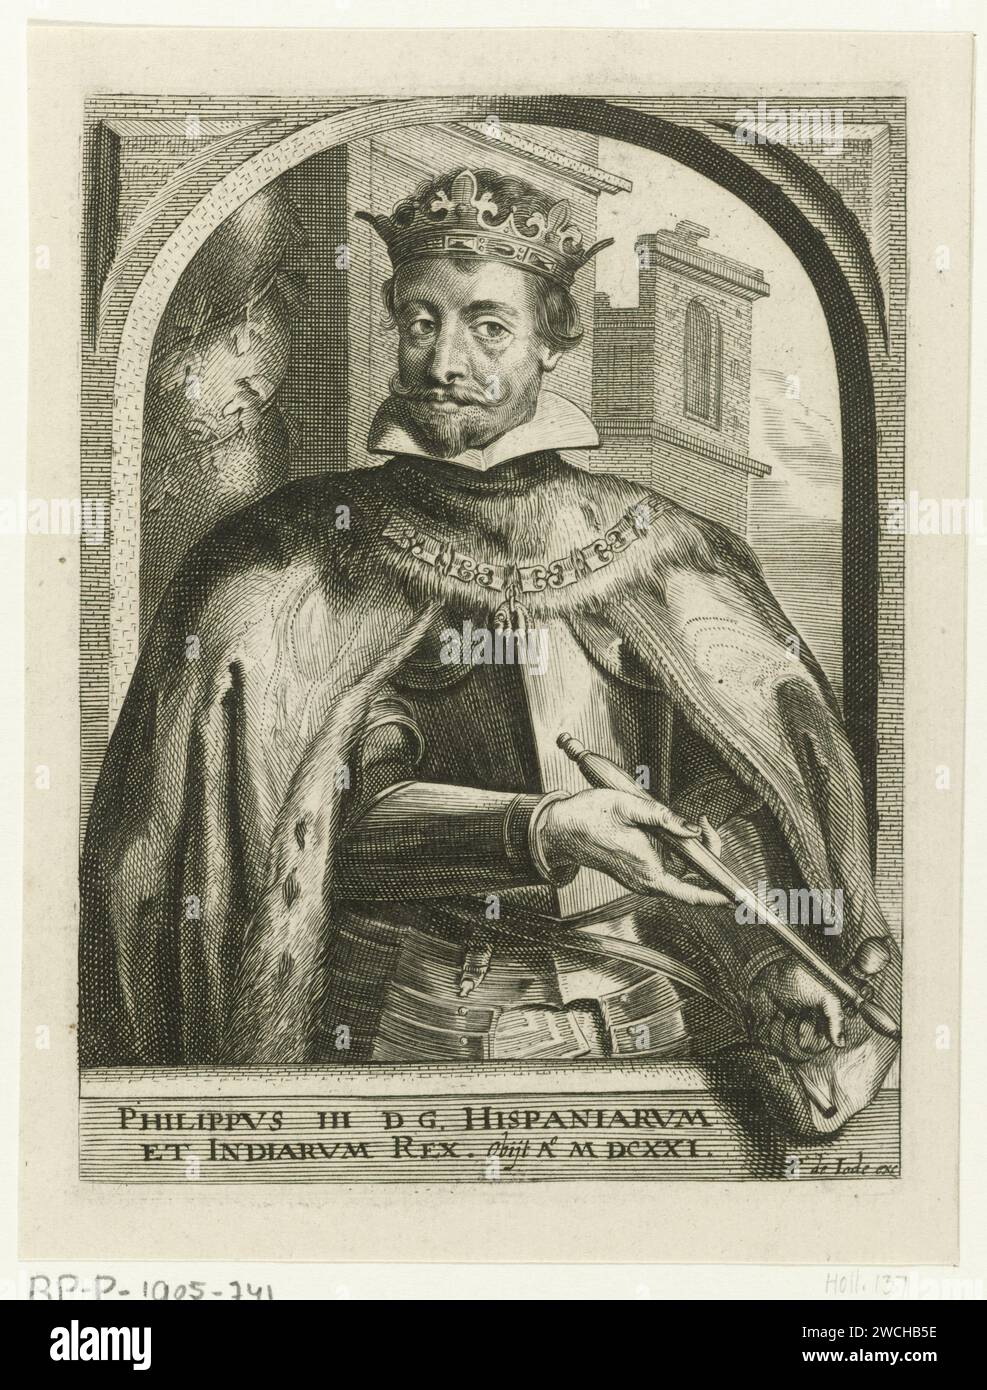 Portrait of Philip III, King of Spain, Pieter de Jode (II), 1628 - 1670 print Portrait of Philip III, halfway. He has been crowned and wears a harness, mantle and a chain with the order of the Golden Fleece. In his right hand he gives a scepter. The portrait is contained in an arched frame with square peripheral. In the margin a two -way caption in Latin. Antwerp paper etching / engraving knighthood order of the Golden Fleece. crown (symbol of sovereignty). sceptre, staff (symbol of sovereignty). armour Stock Photo